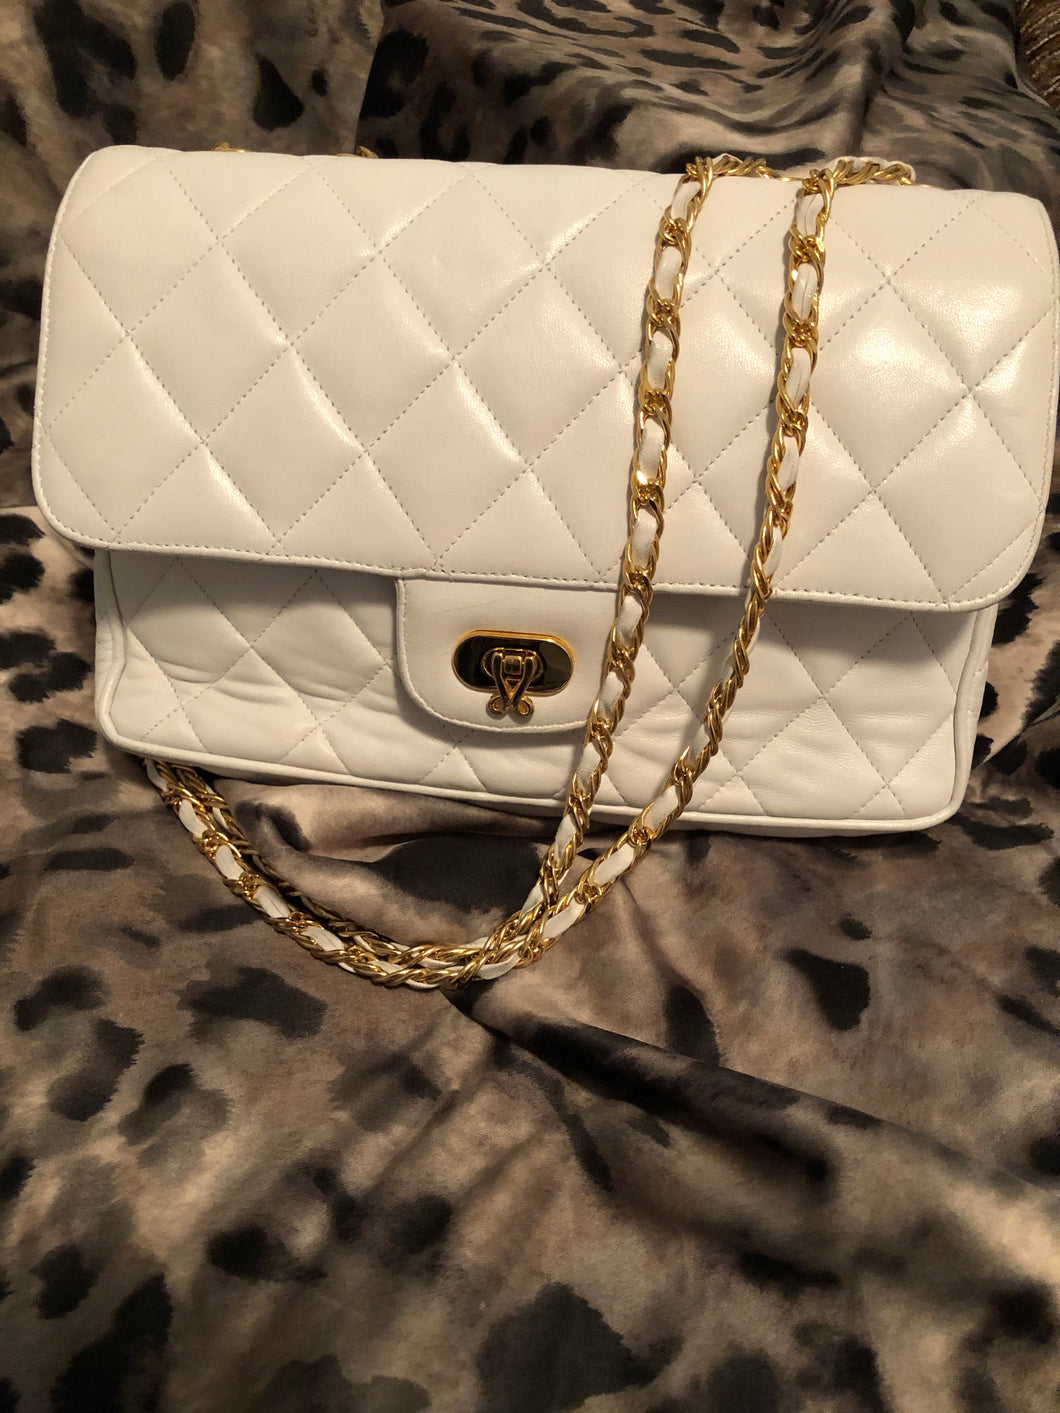 consignment bag - ivory/white quilted leather